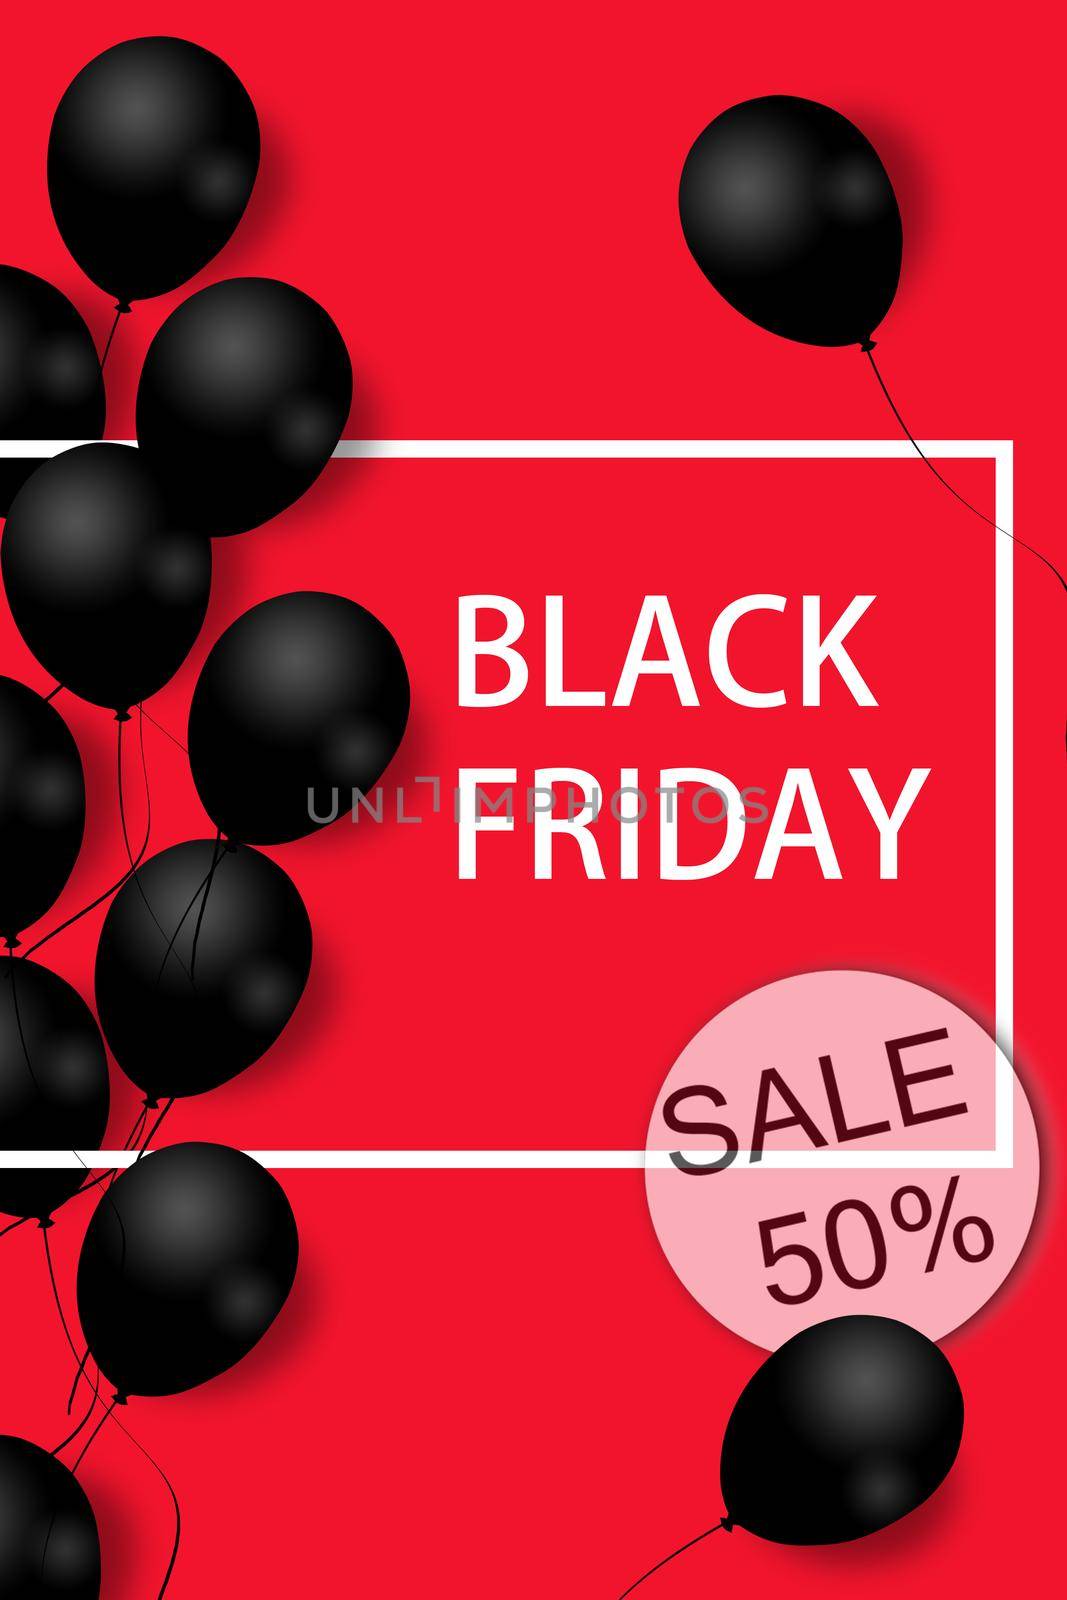 Black Friday Sale Poster with black balloons on red background with square frame. Illustration. by nazarovsergey